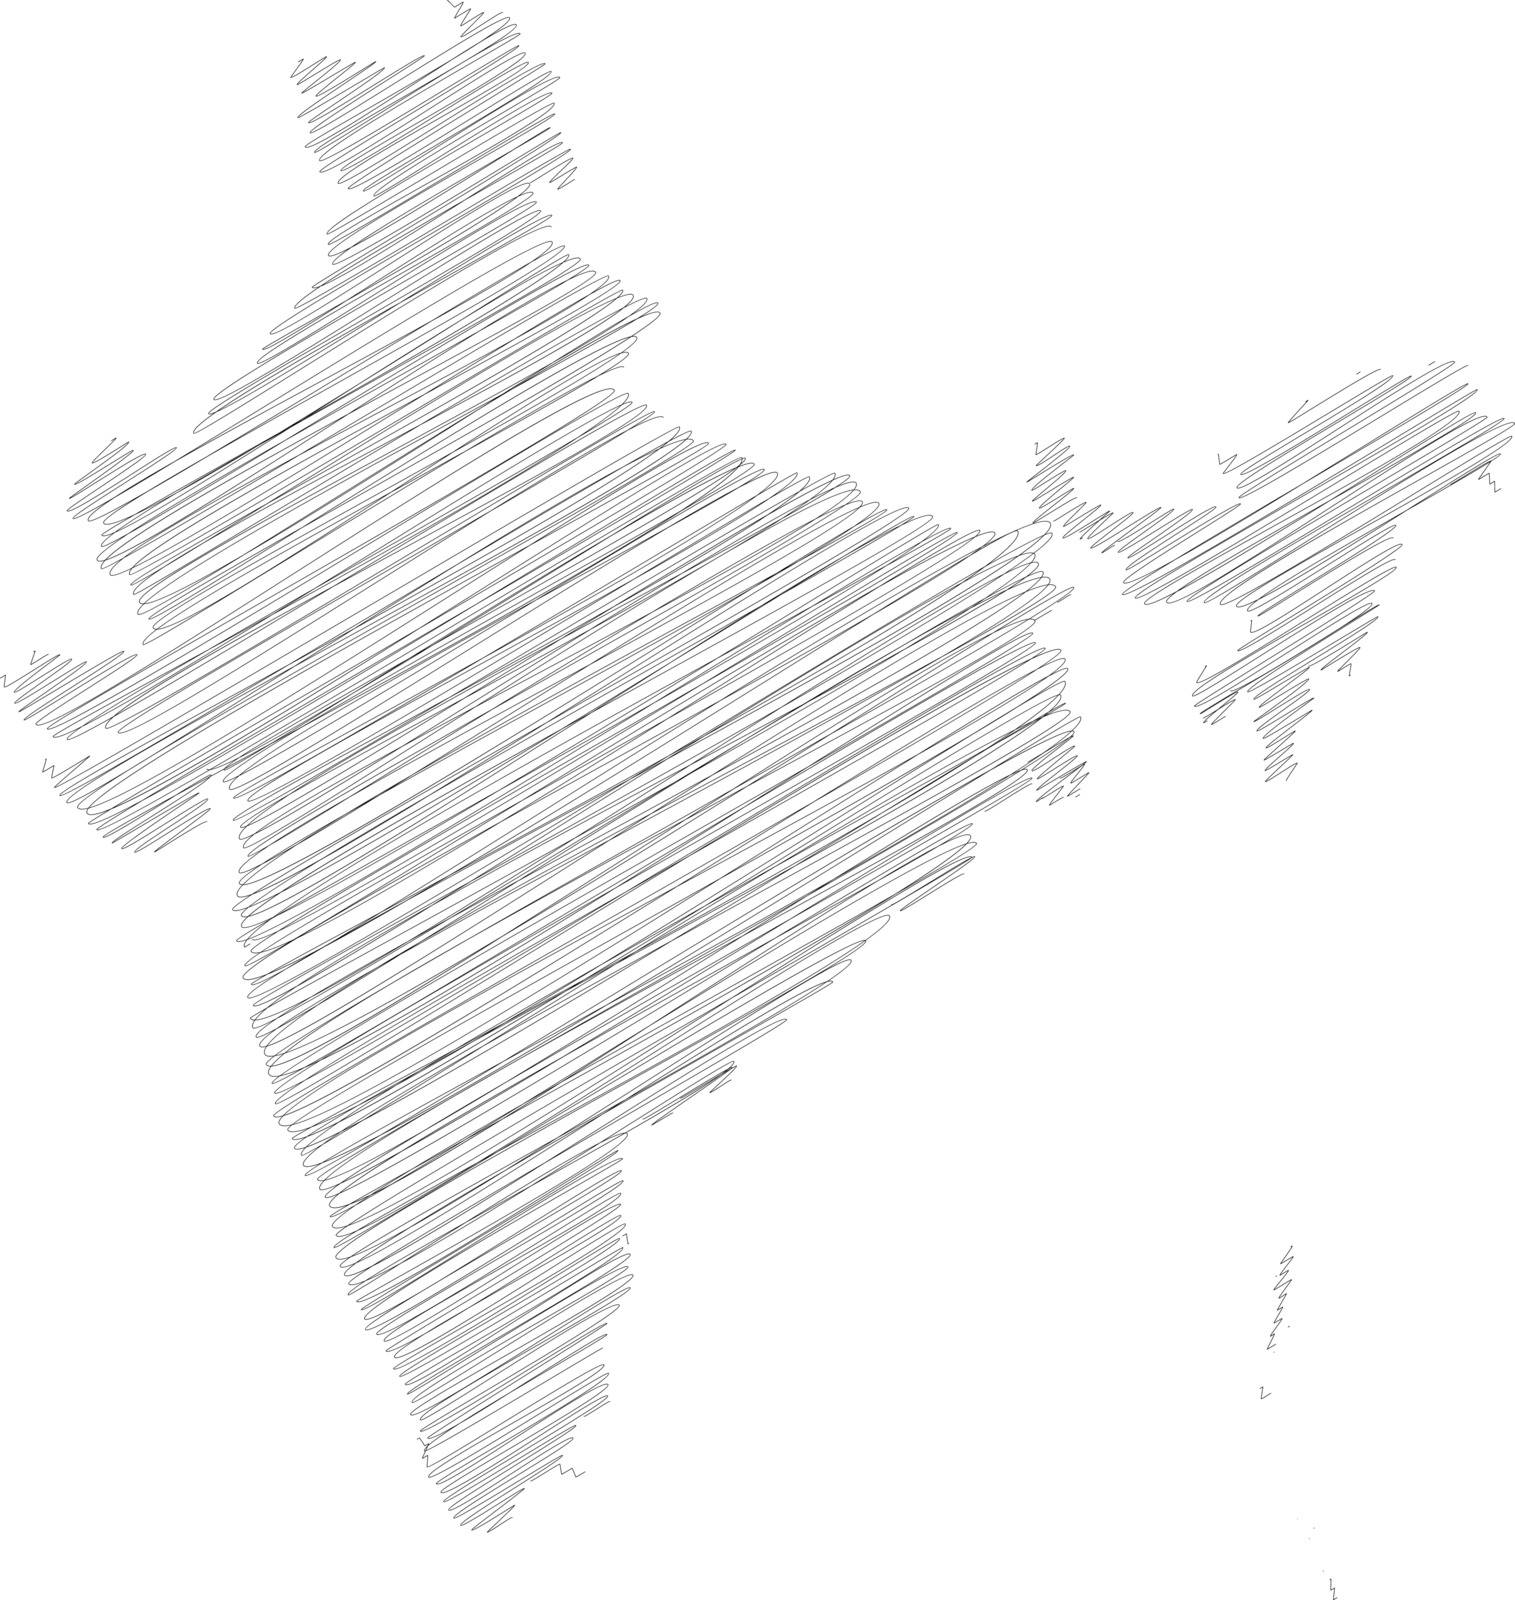 India - pencil scribble sketch silhouette map of country area with dropped shadow. Simple flat vector illustration by pyty